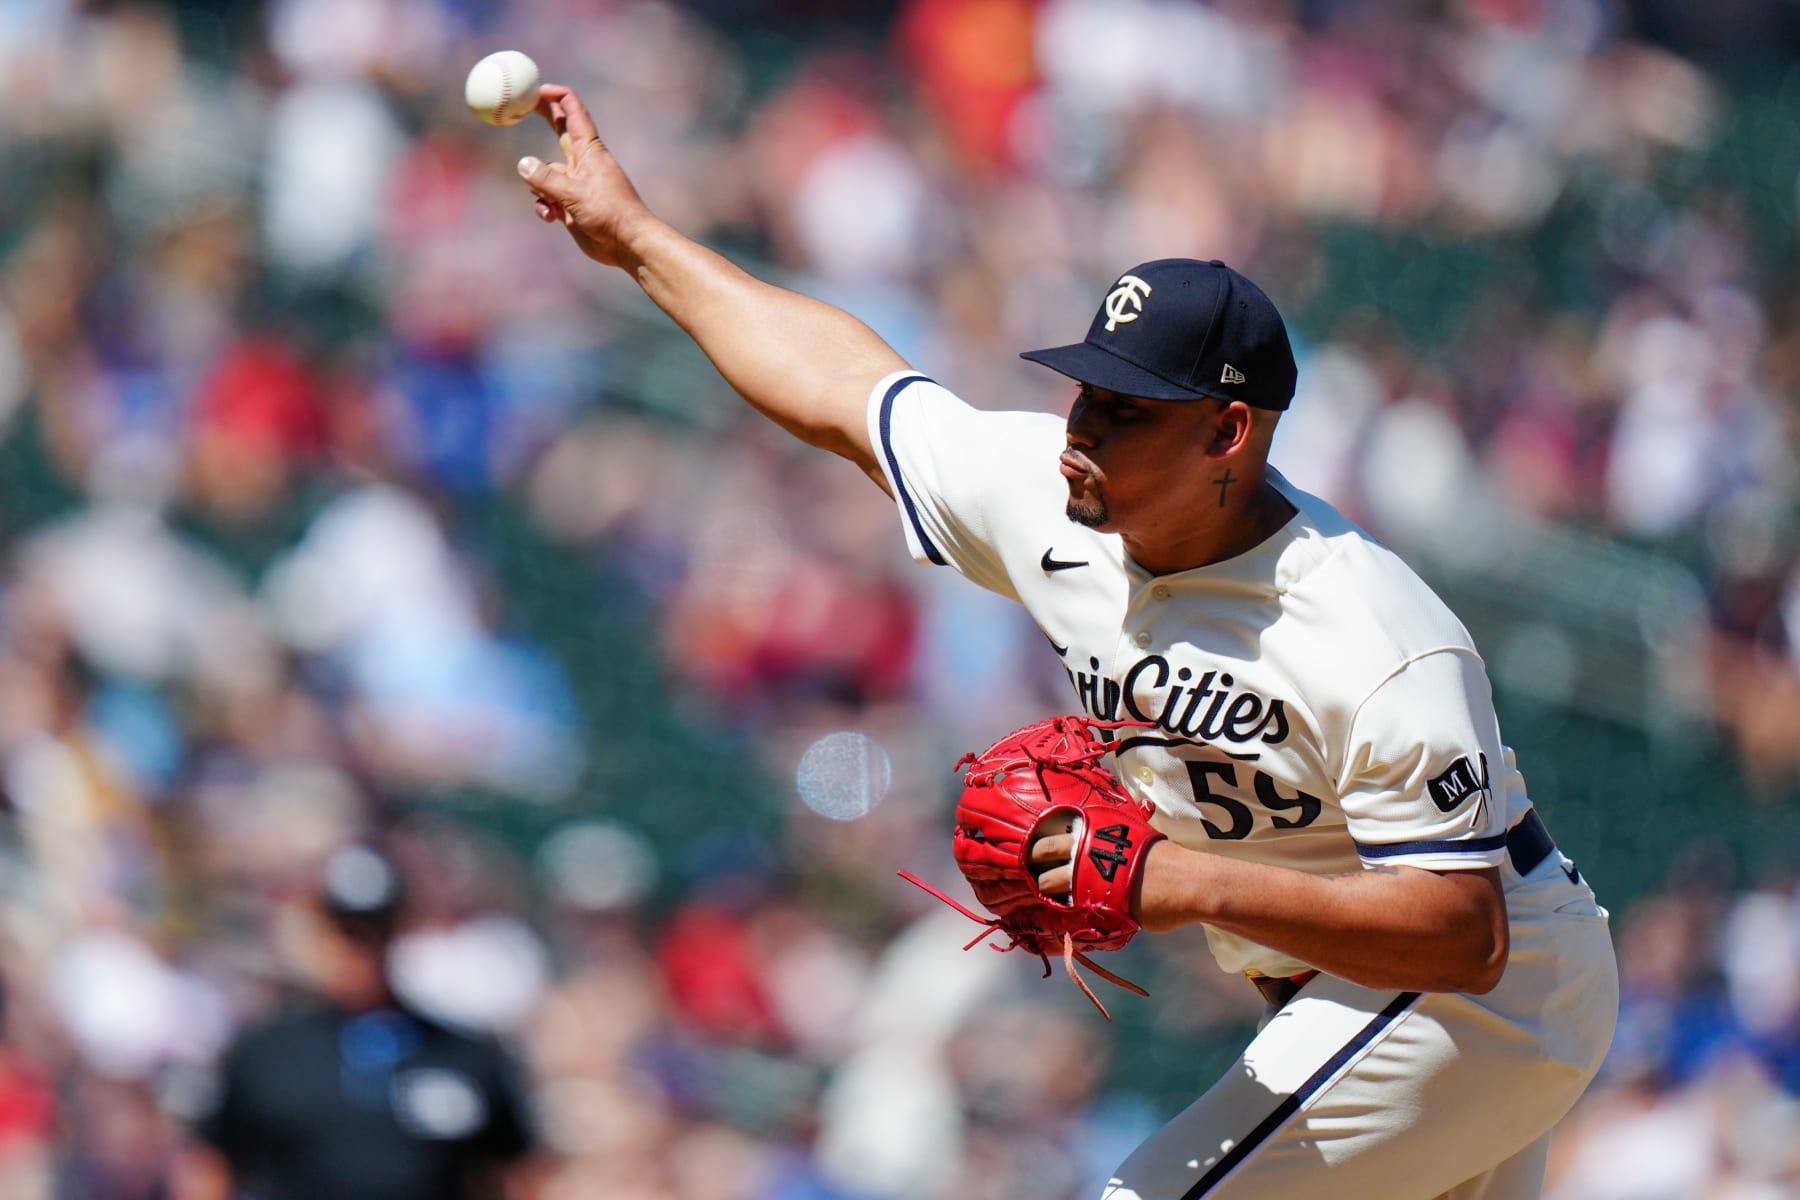 Minnesota Twins' Jhoan Duran Goes Viral After Warm-Up Pitch on